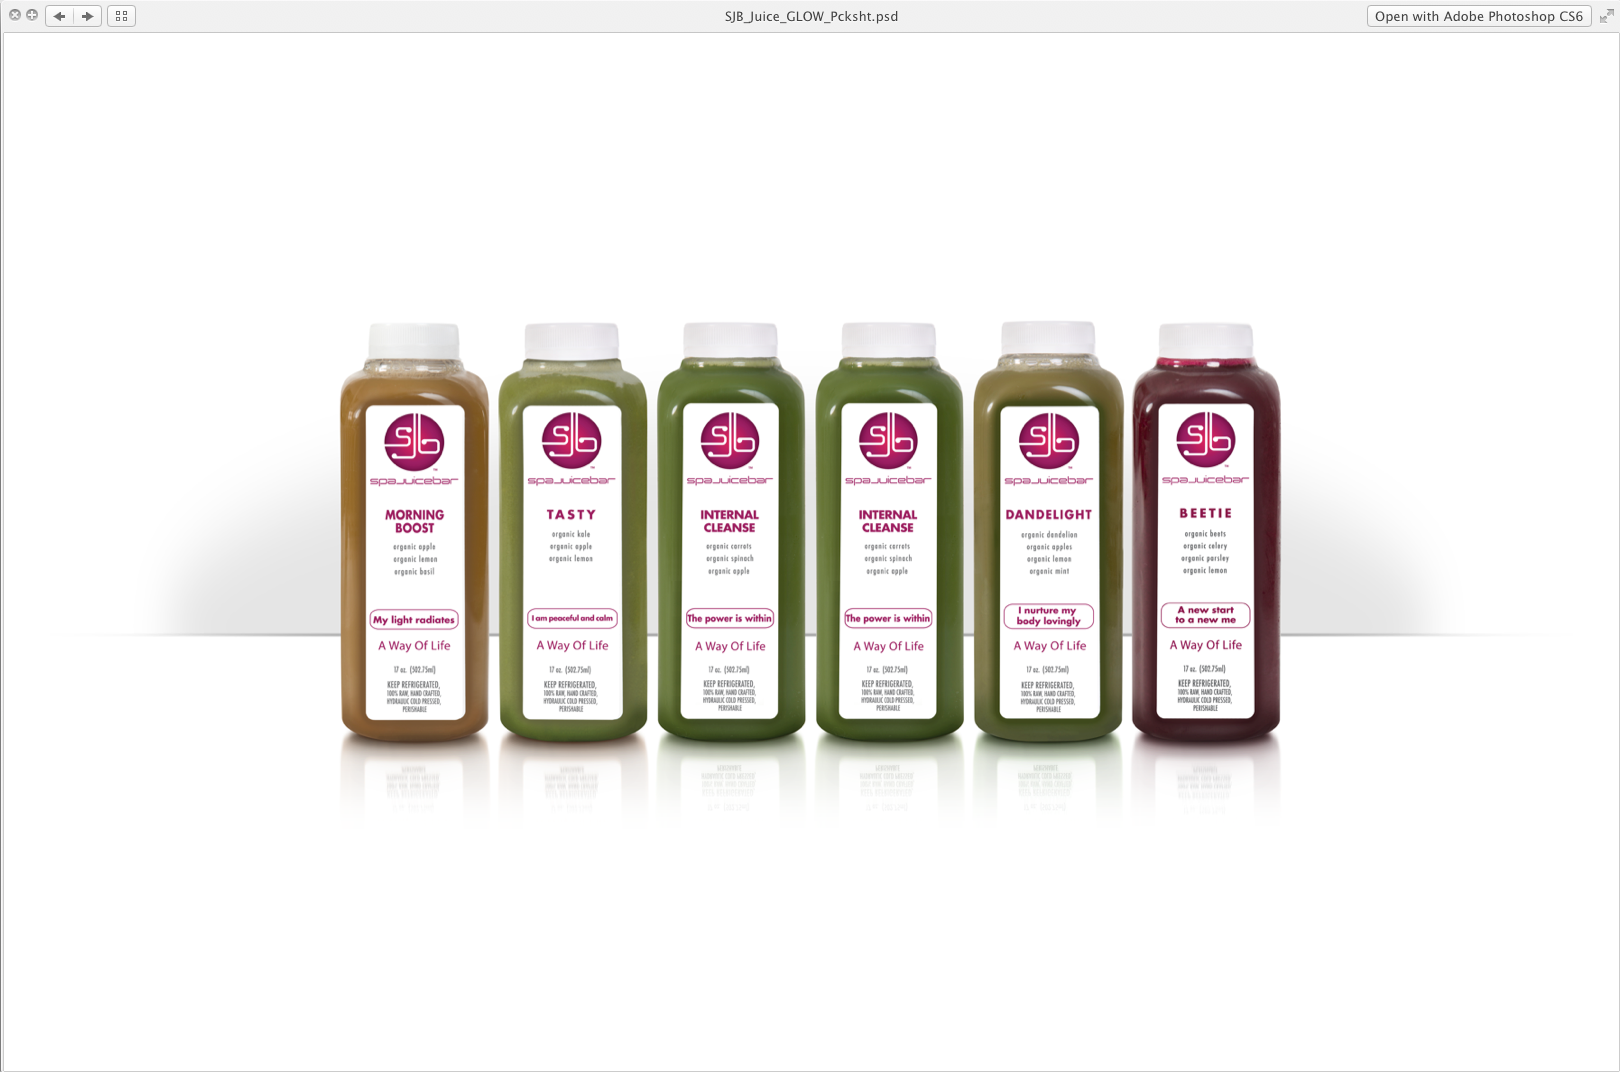 SpaJuiceBar's Summer Cleanse Package is designed to improve health, boost your immune system, lose weight